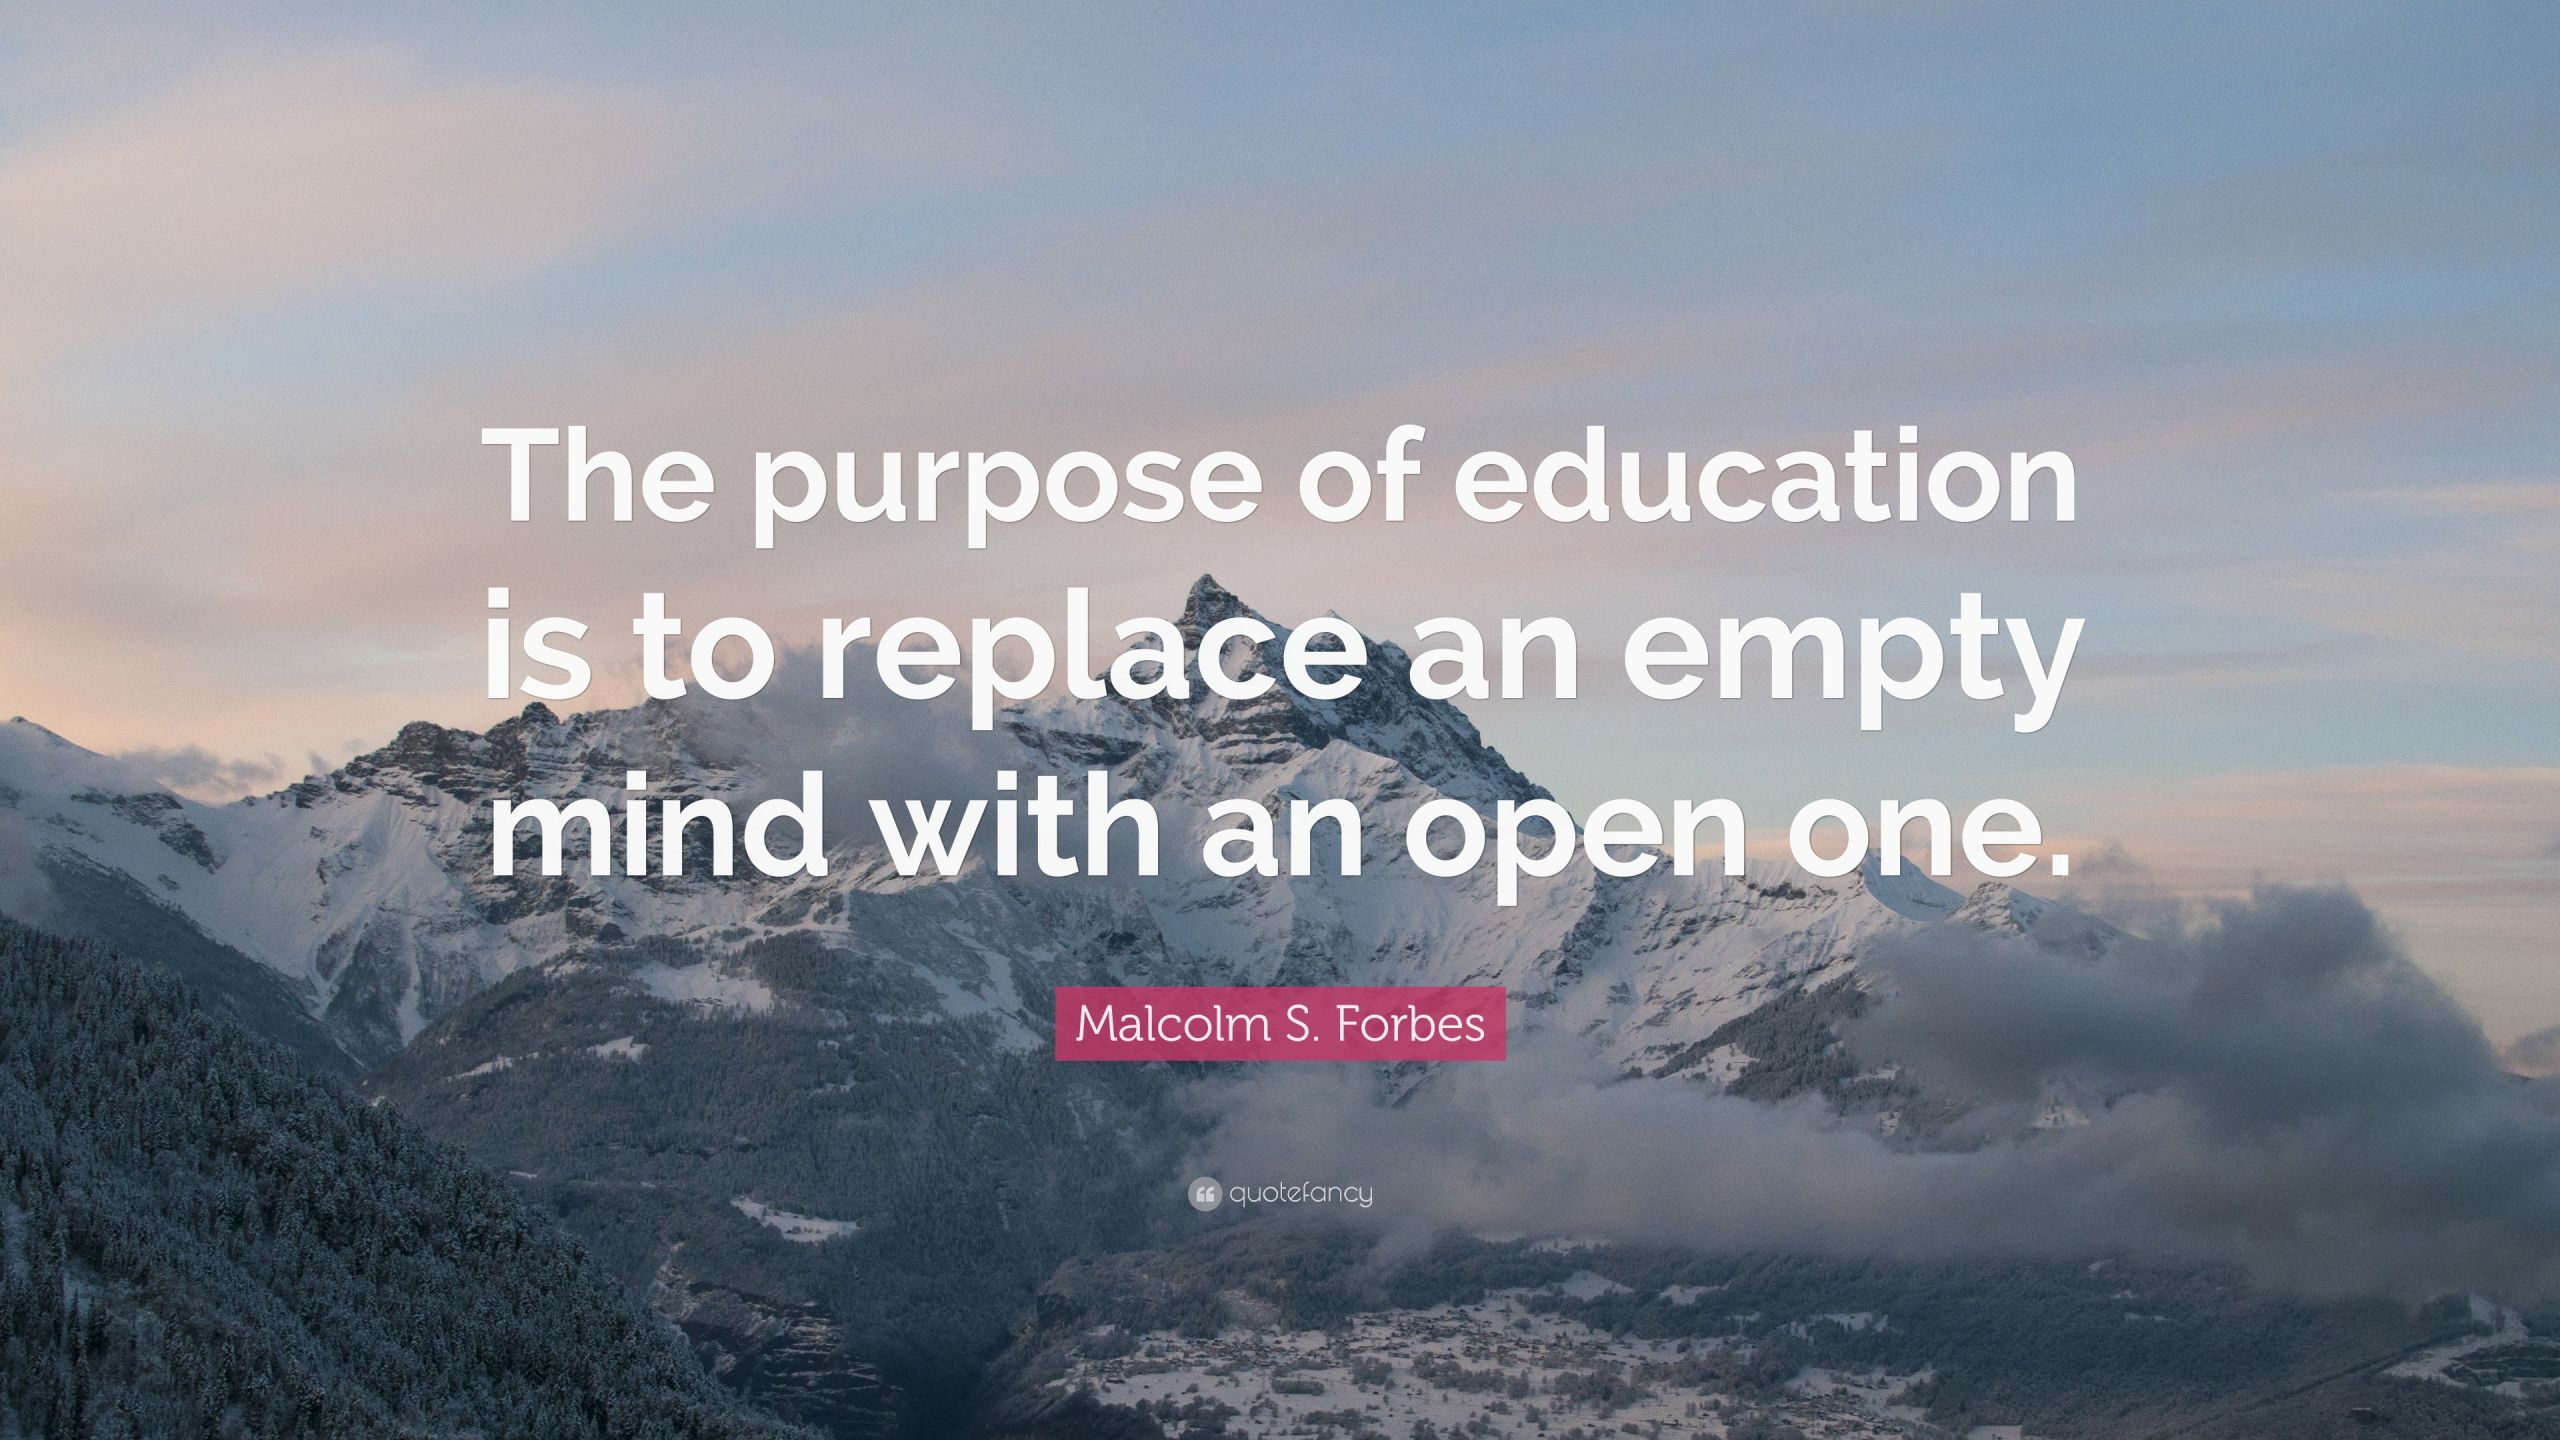 Quotes About Education
 Education Quotes Askideas